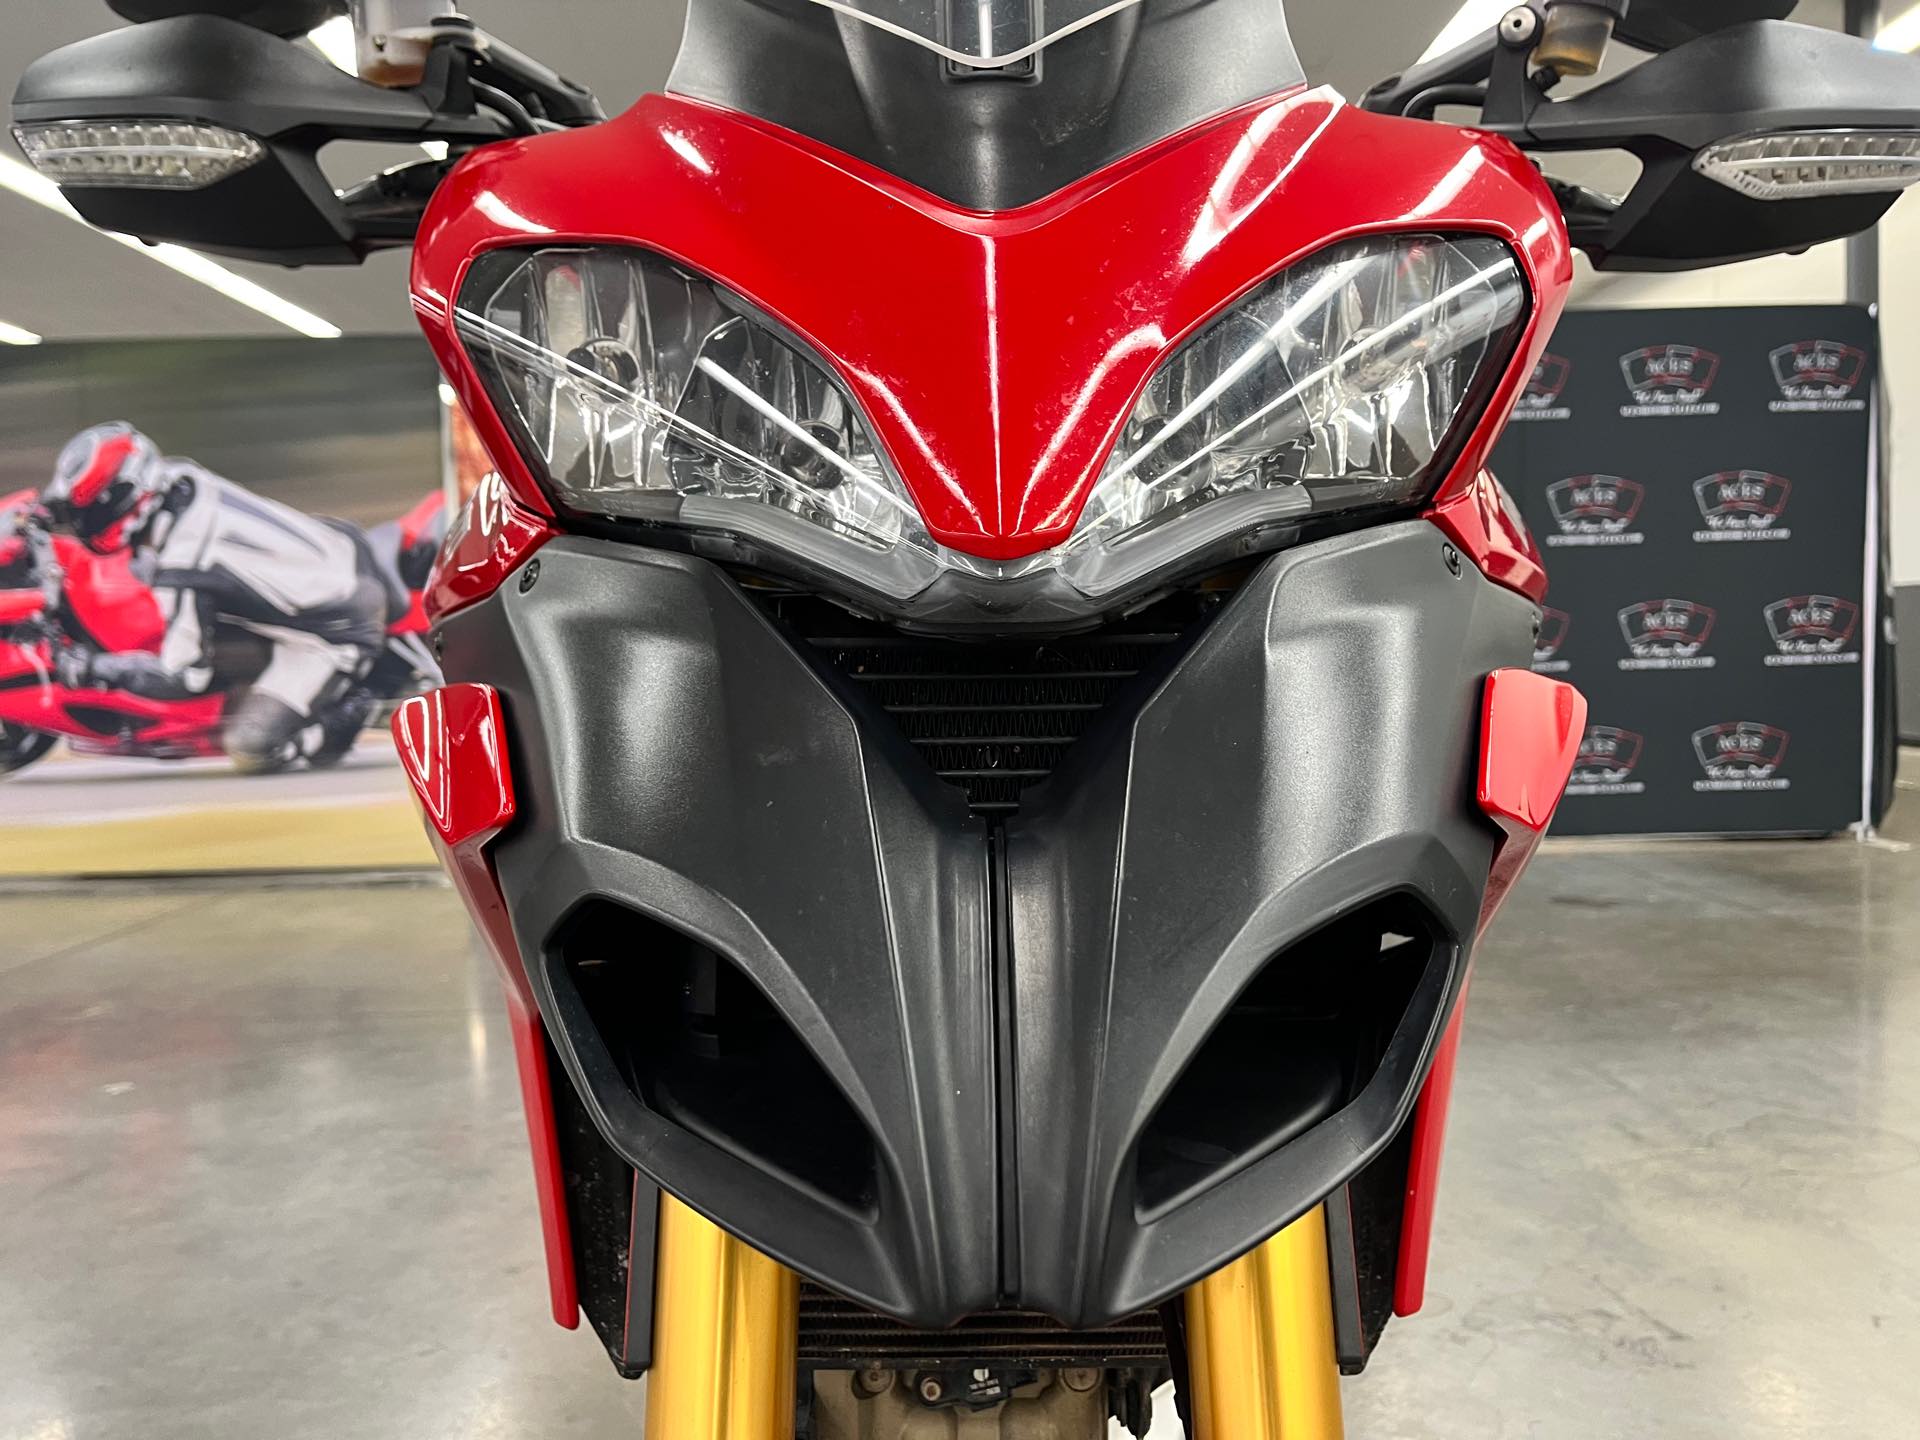 2010 Ducati Multistrada 1200 S Touring Edition at Aces Motorcycles - Denver